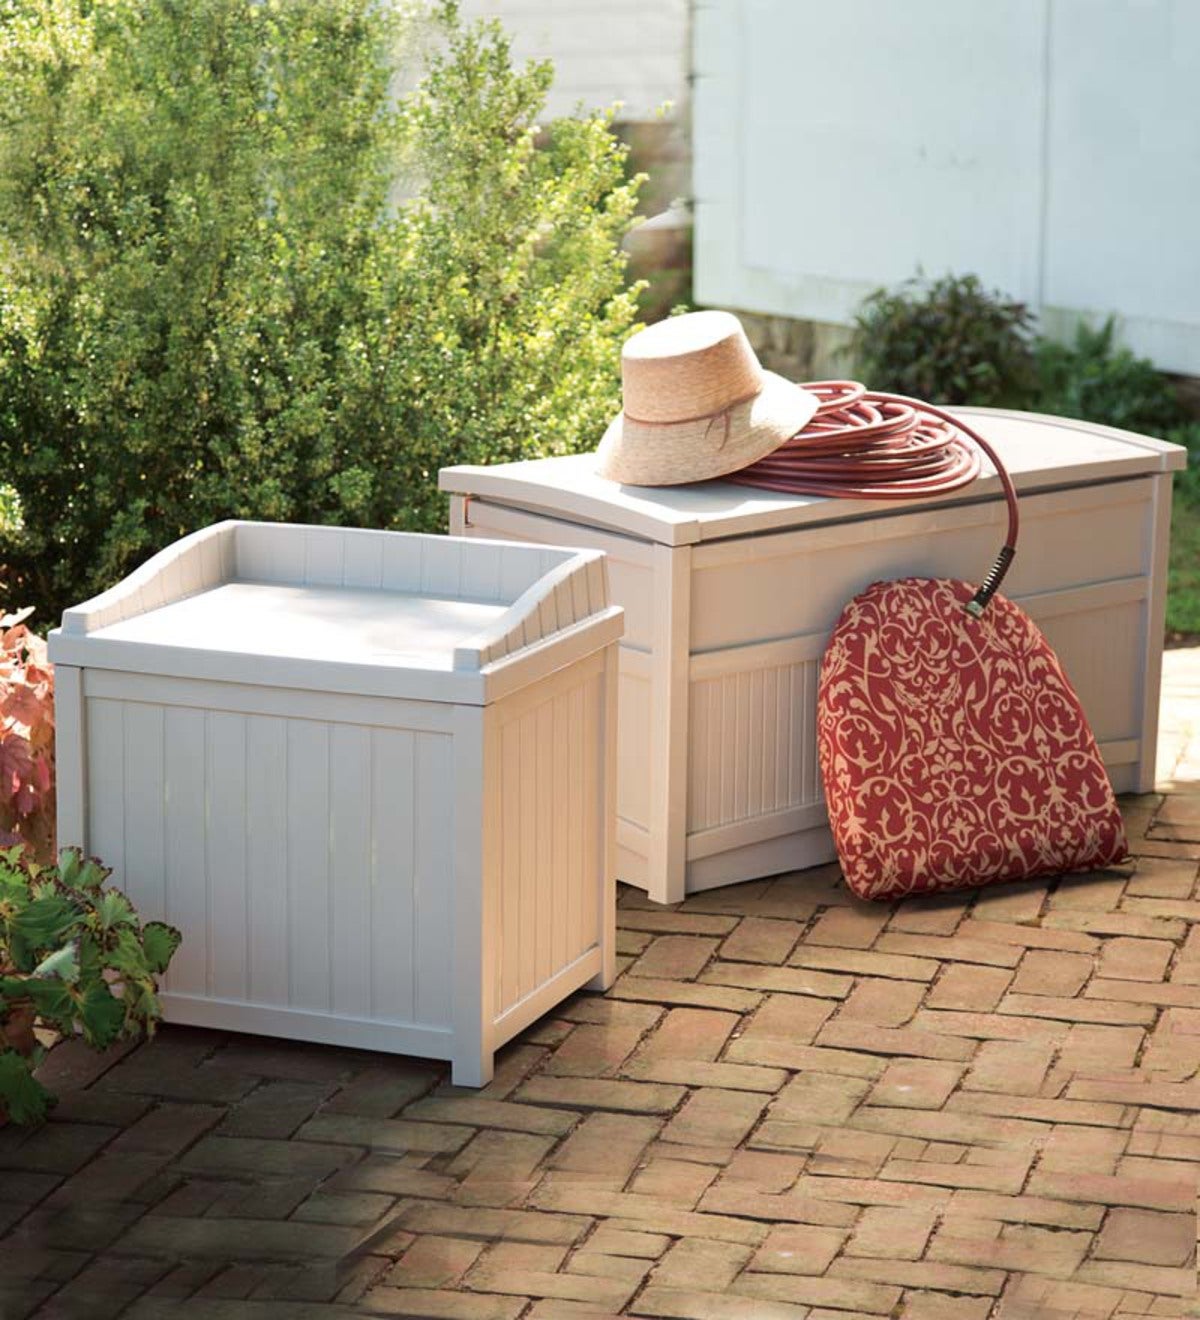 Weather-Resistant Maintenance-Free Resin Storage Boxes With Stay-Dry Lids